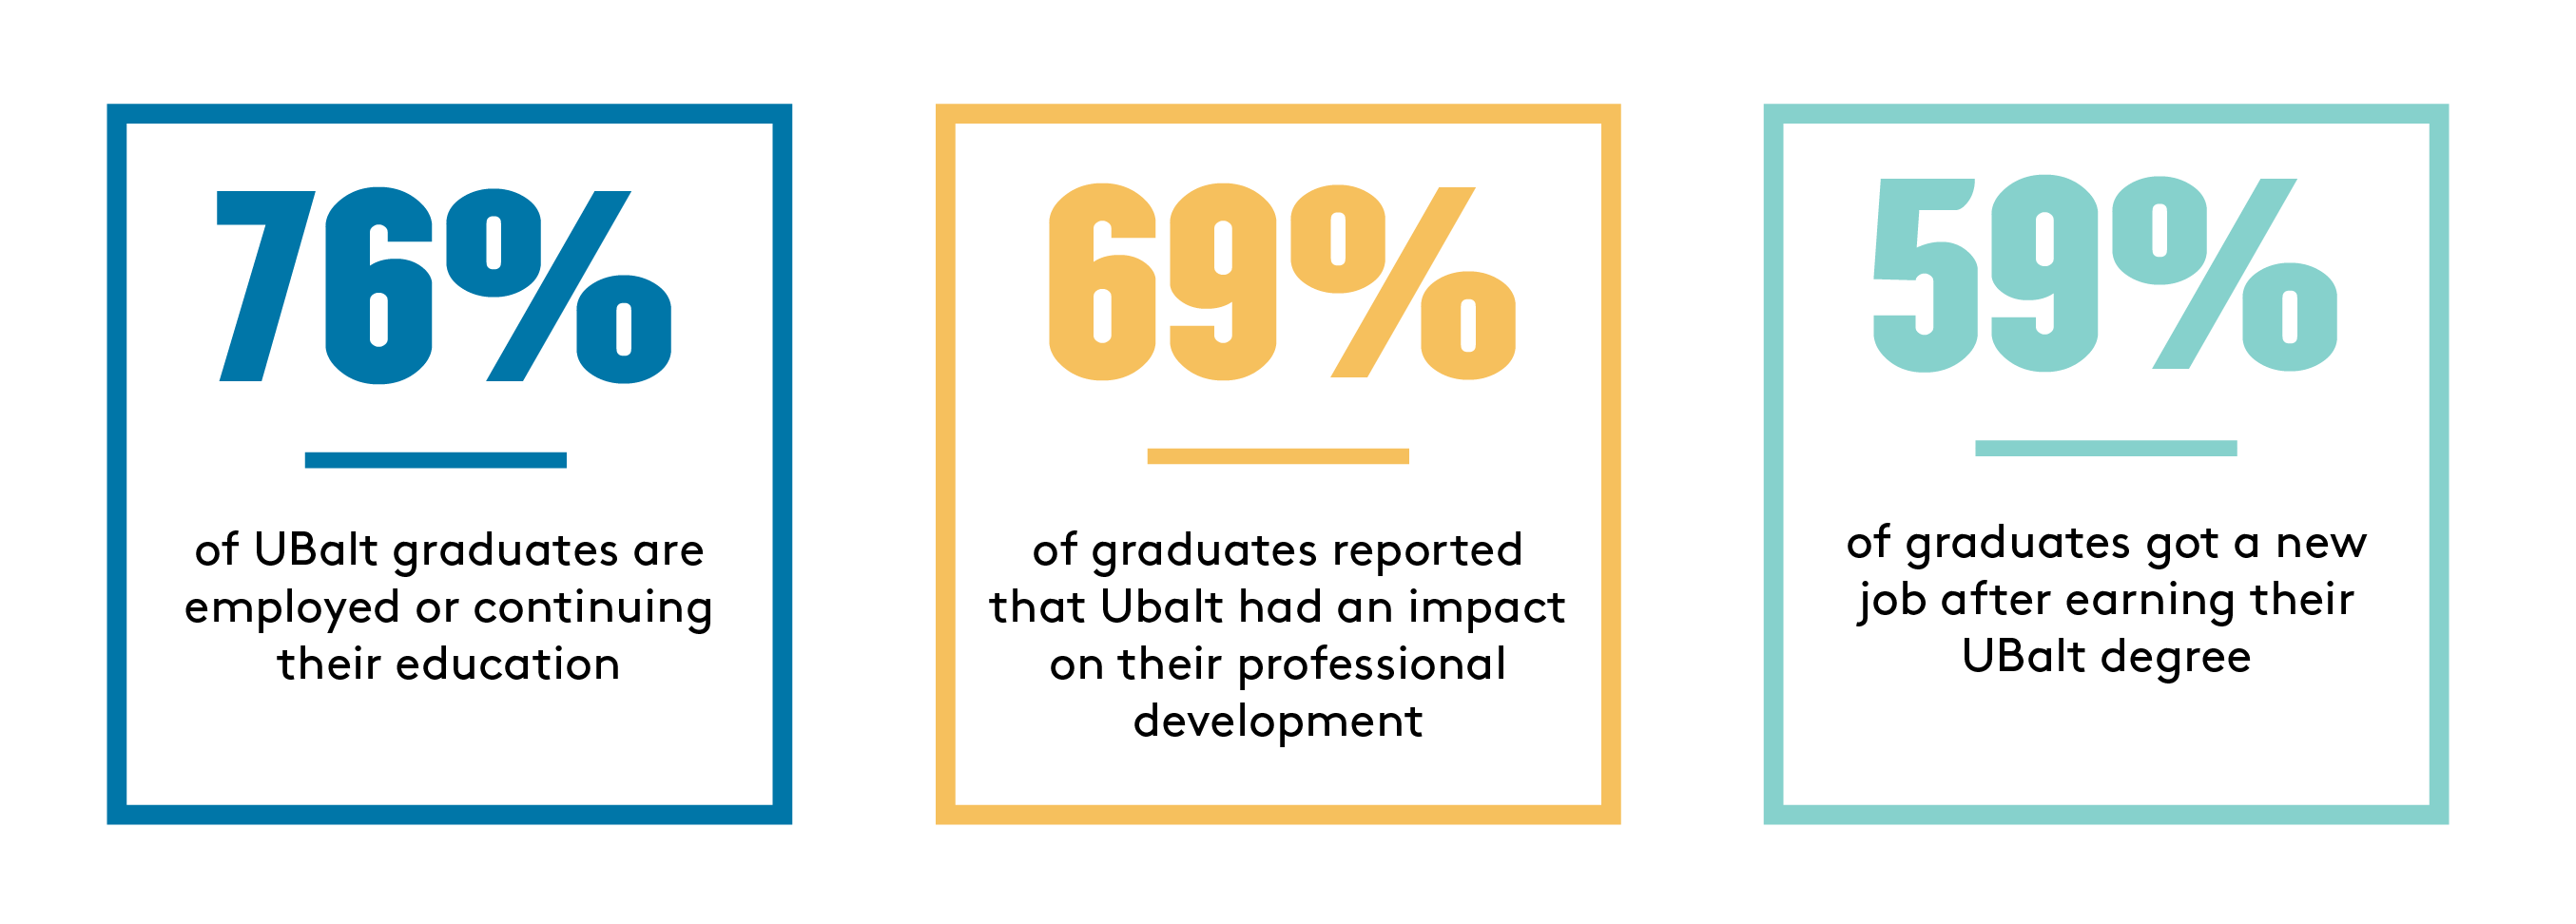 76% of graduates are employed or continuing their education. 69% report that Ubalt had an impact on their professional development. 59% got a new job after graduating from UBalt.